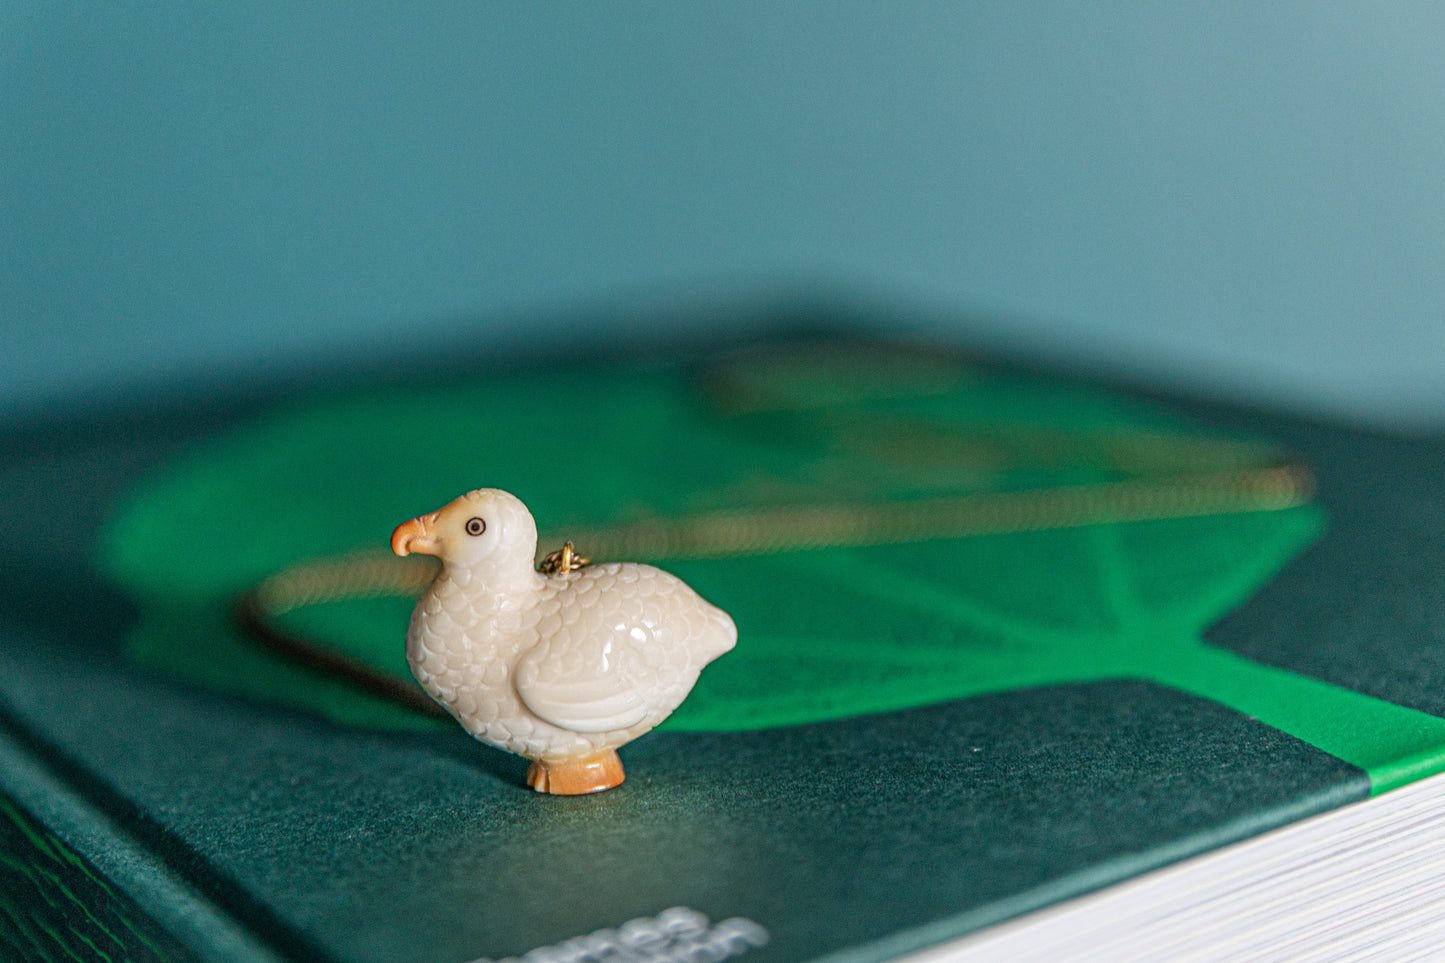 Dodo tagua necklace on a green book that blurs into the background.